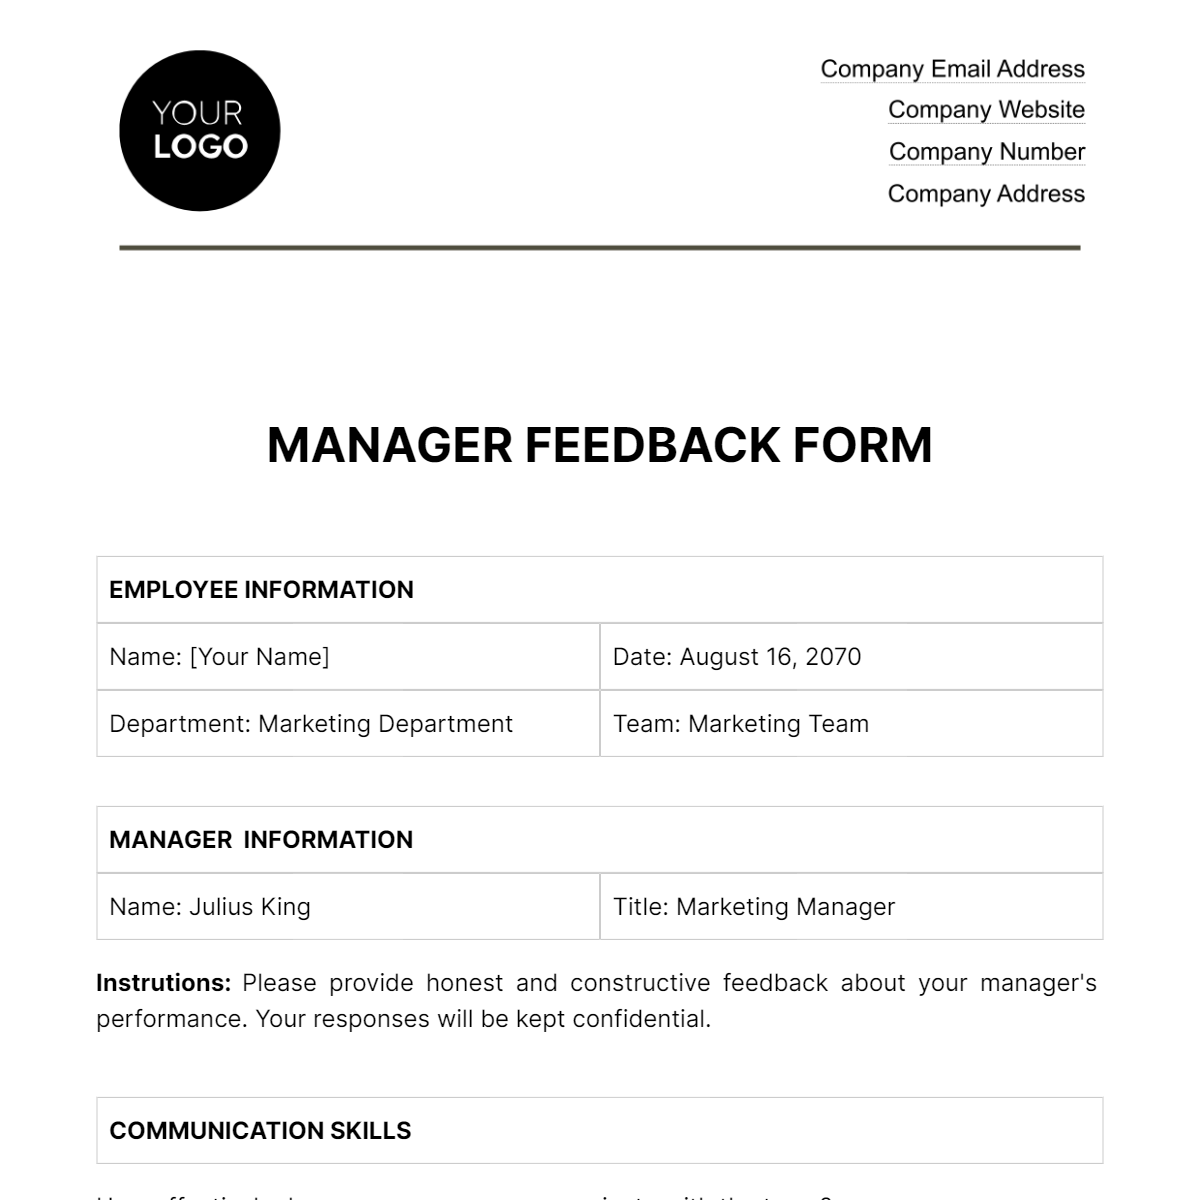 Manager Feedback Form HR Template